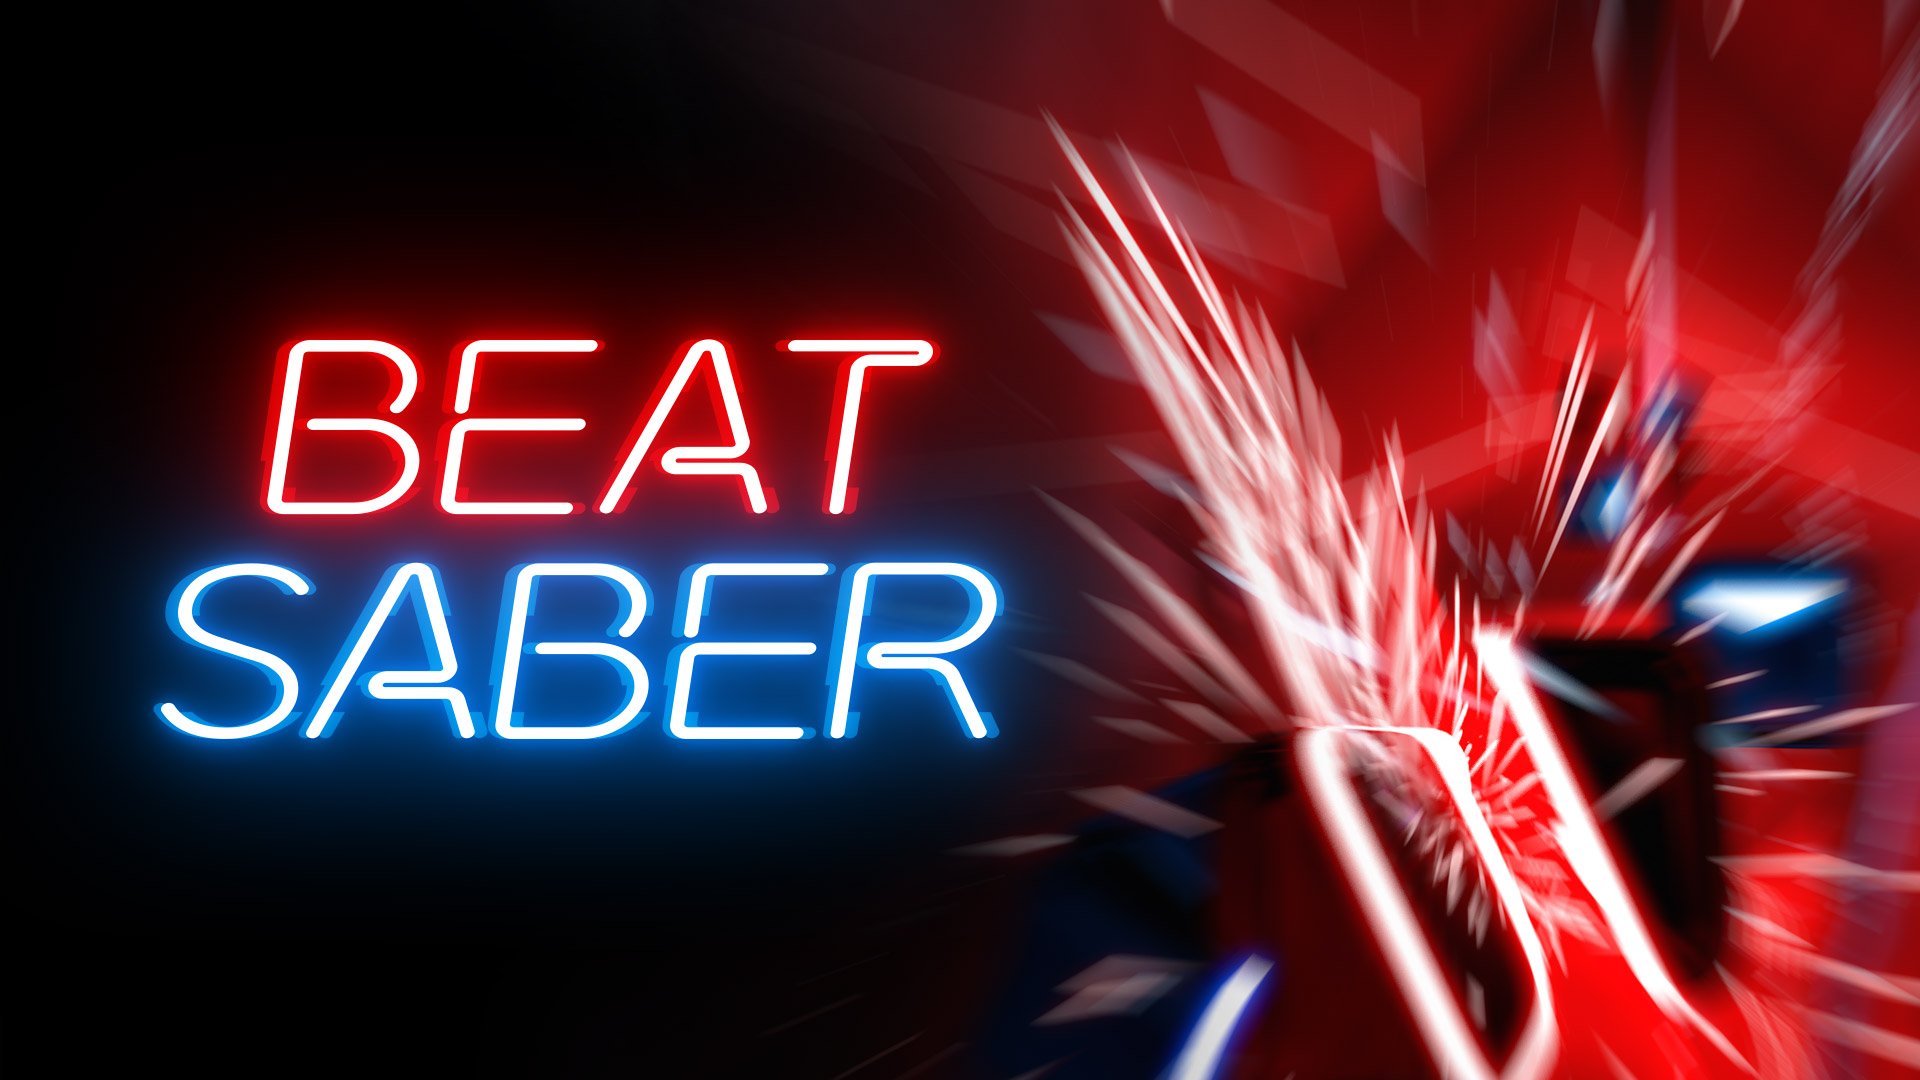 gryde læbe selvbiografi Beat Saber Update 1.33 Is Out, Here Are The Patch Notes